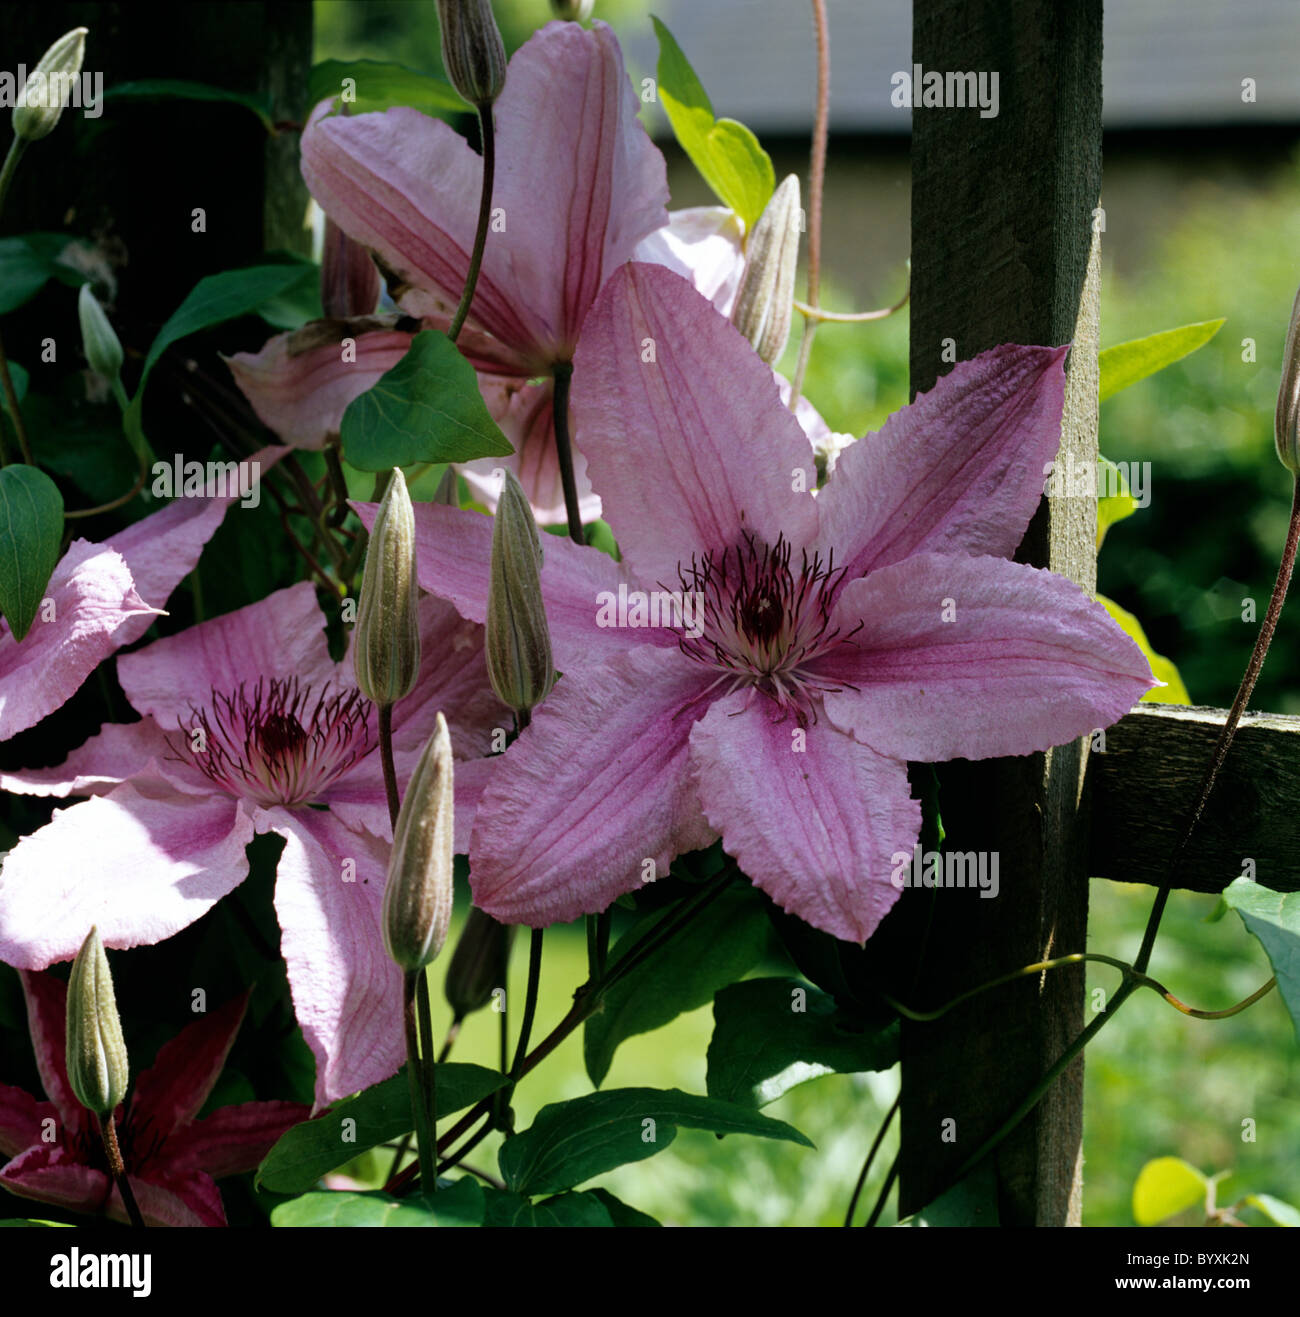 Flowers of Clematis 'Nelly Moser' on a garden trellis Stock Photo